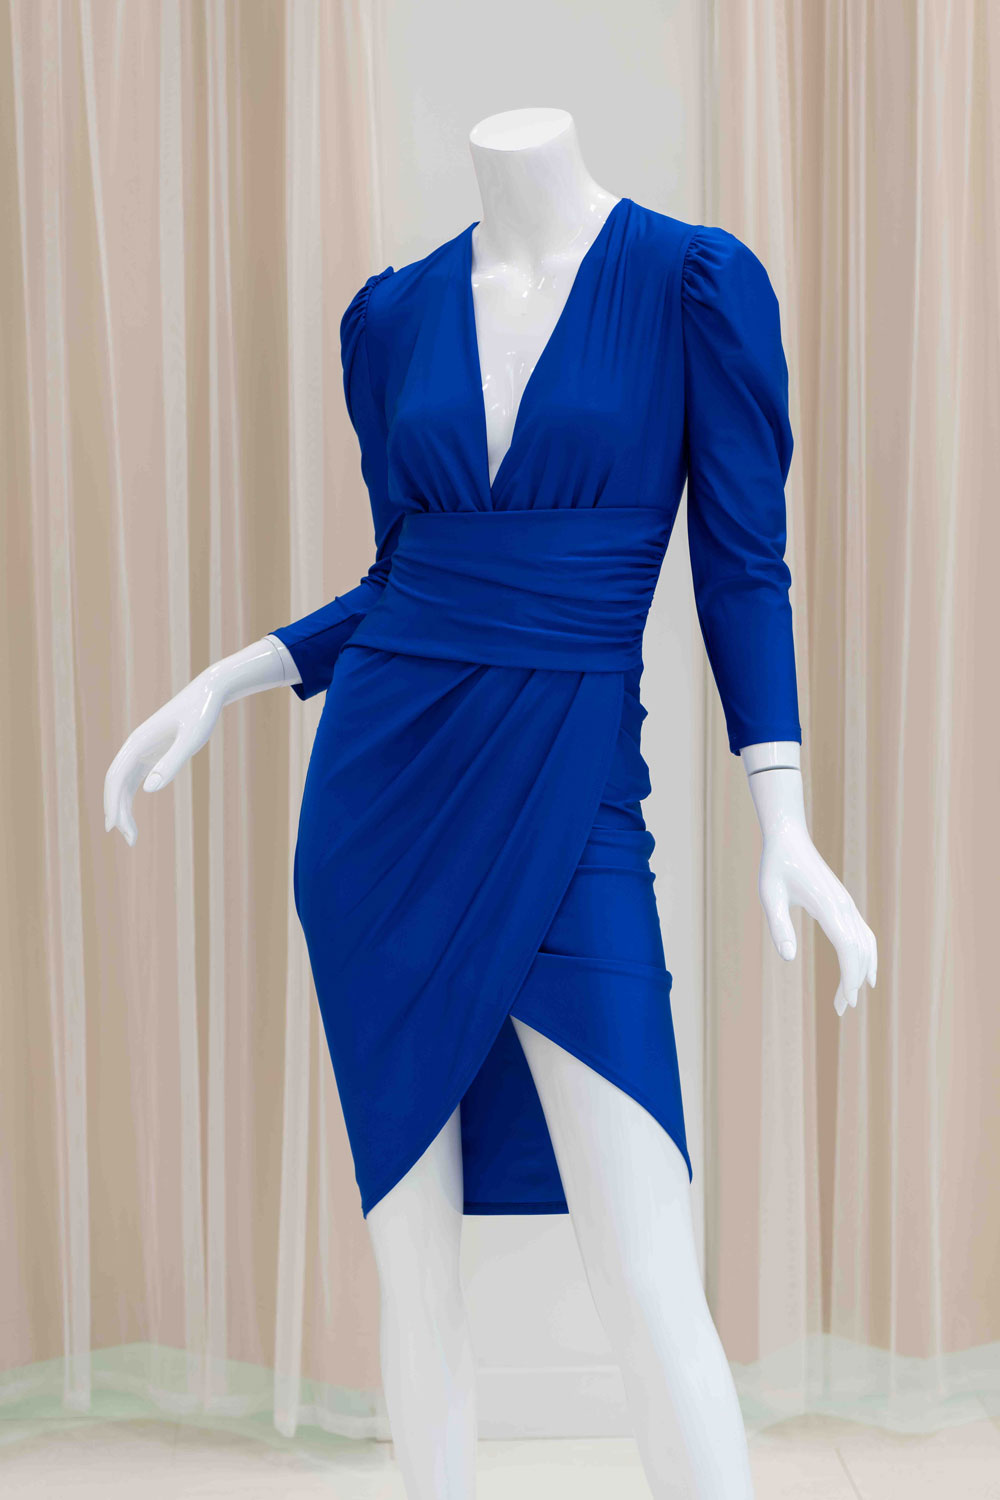 Long Sleeve Stretchy Party Dress in Royal Blue